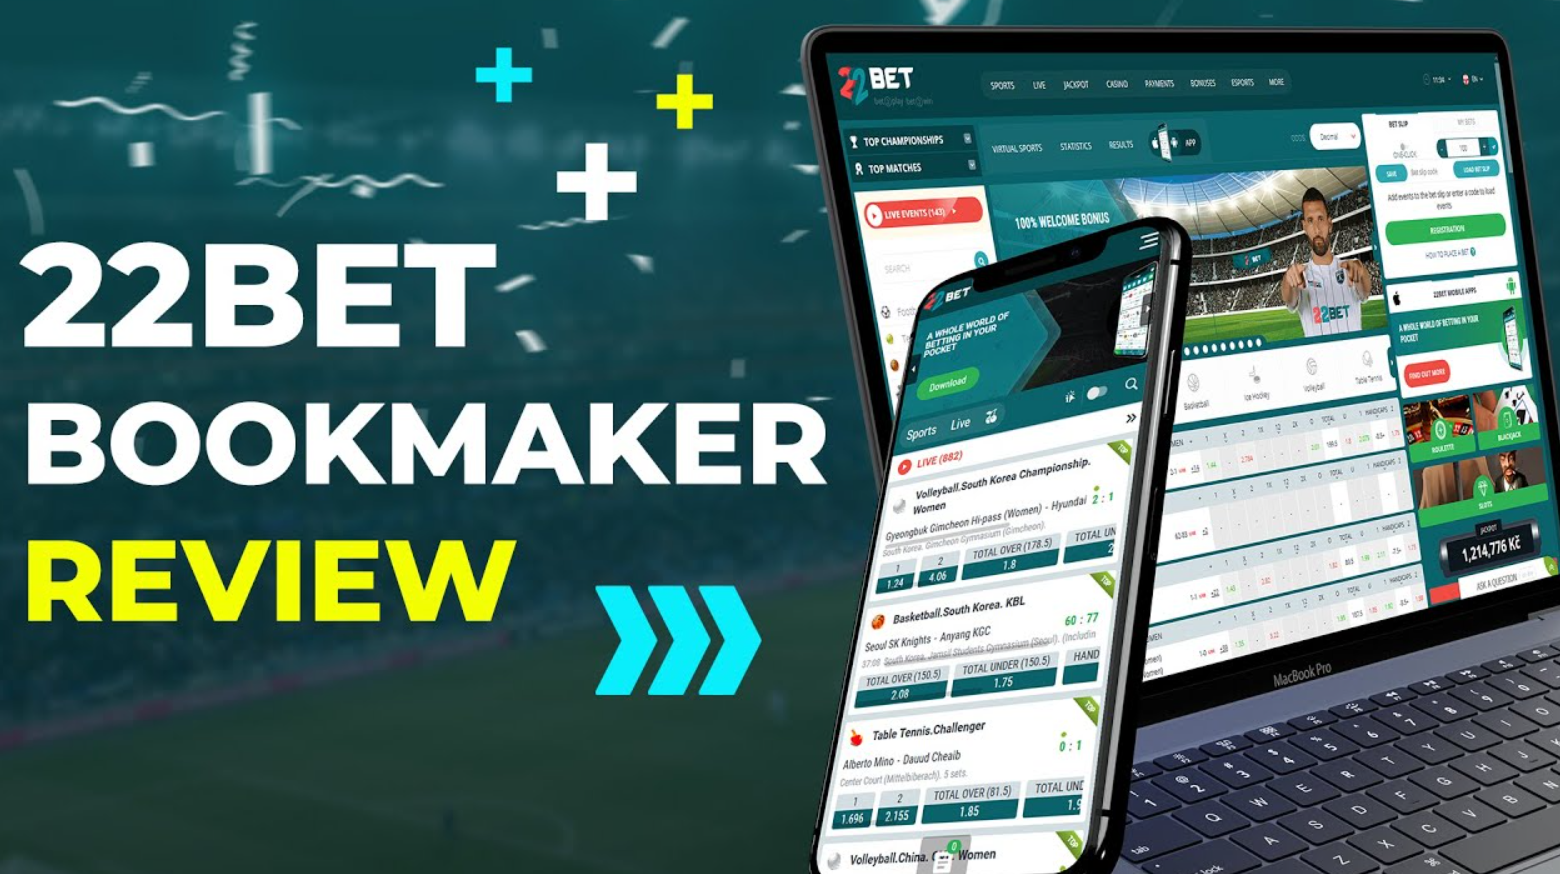 The 22bet apk: where and how to download for Android